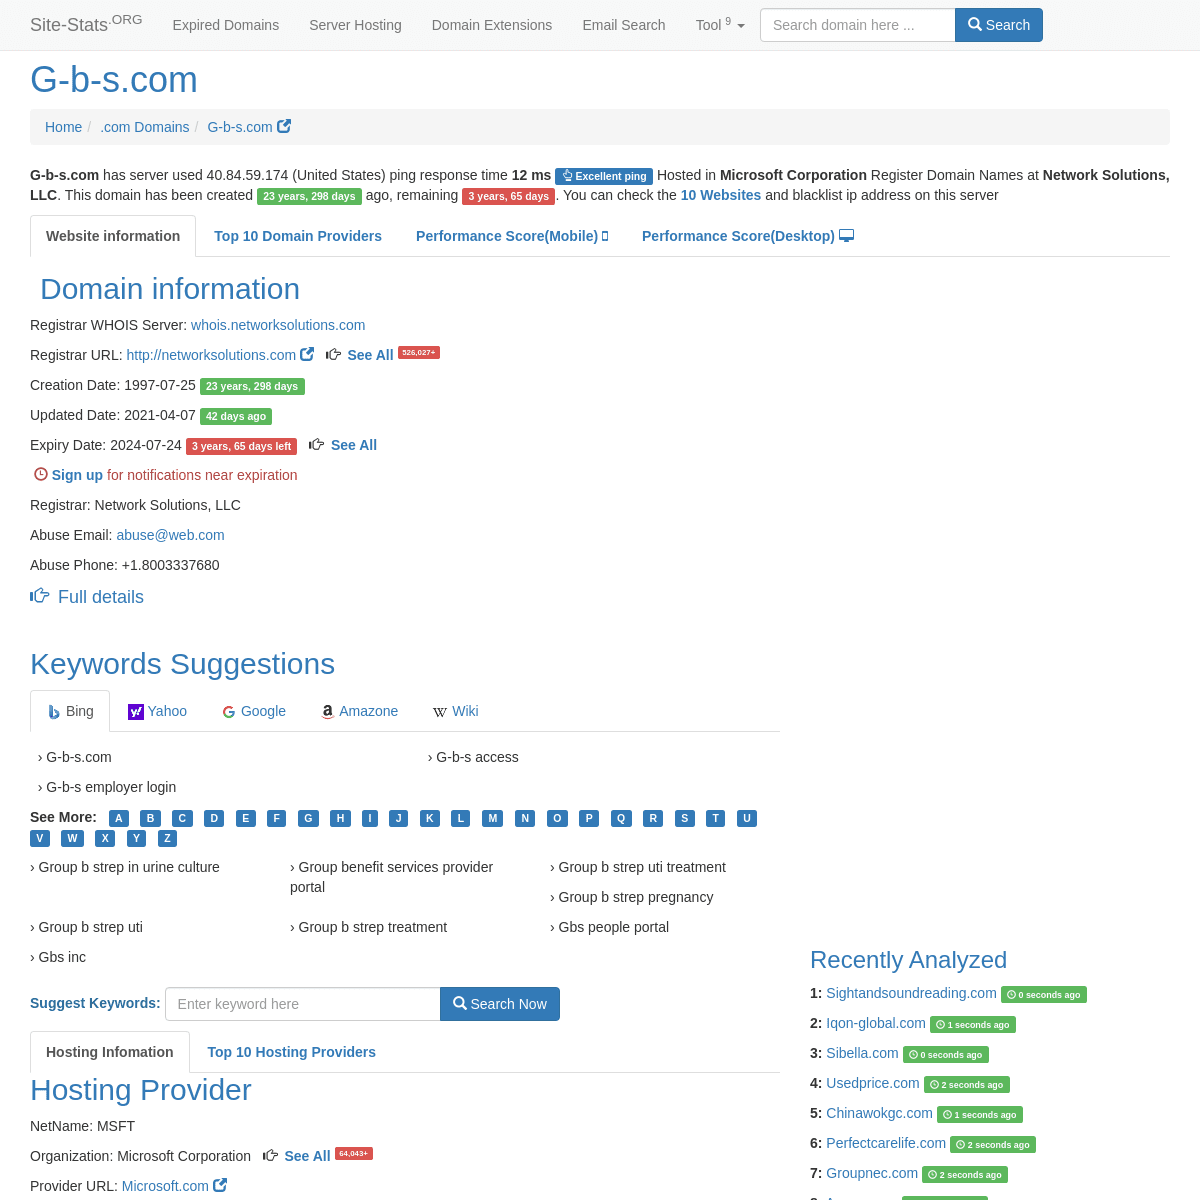 A complete backup of https://site-stats.org/g-b-s.com/